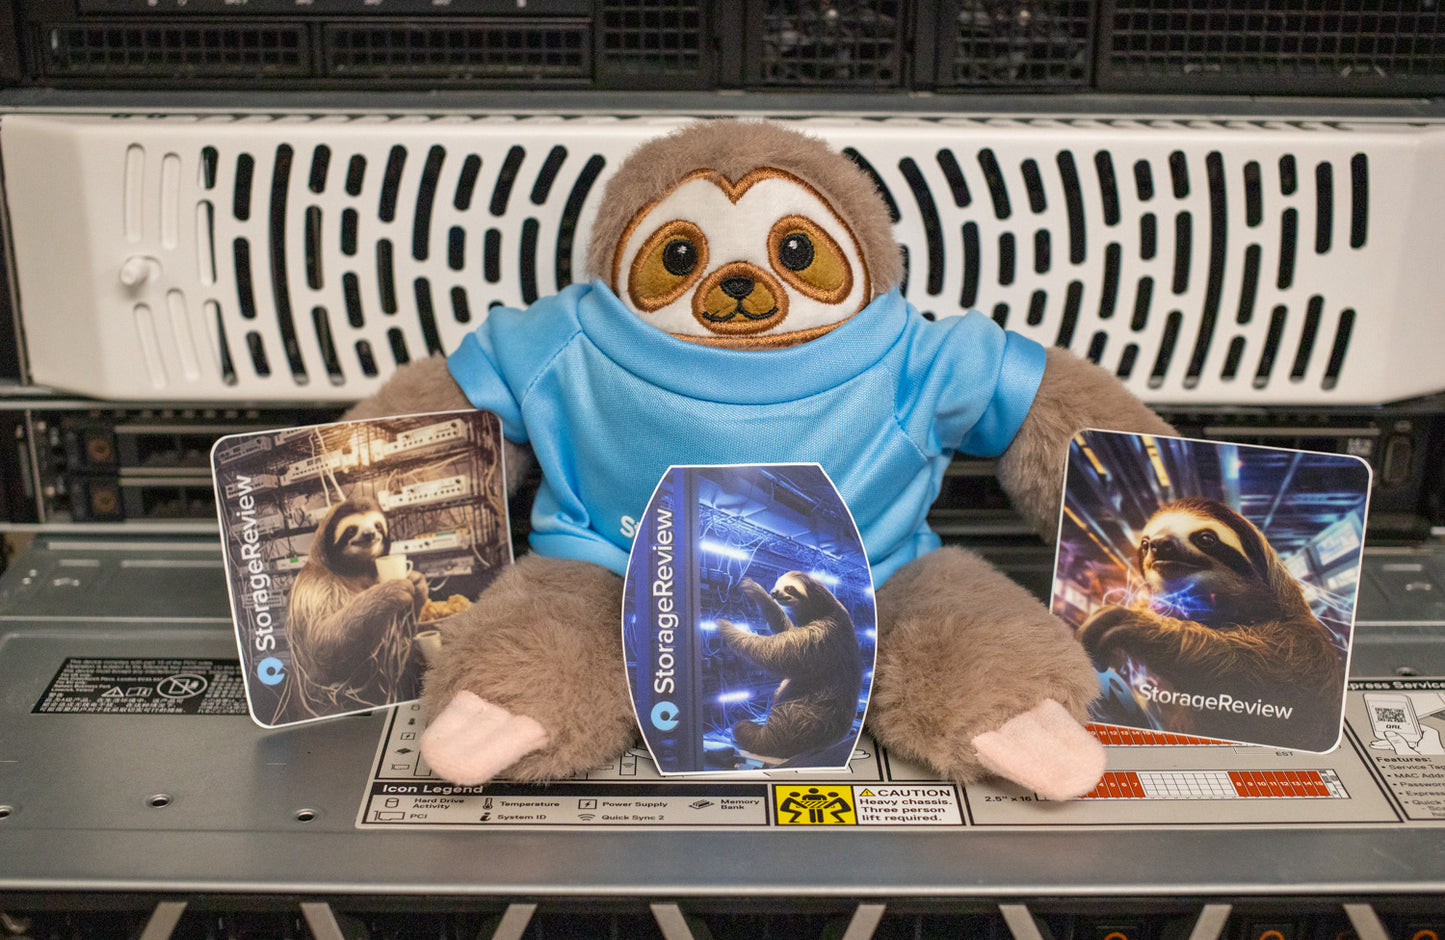 StorageReview Sloth